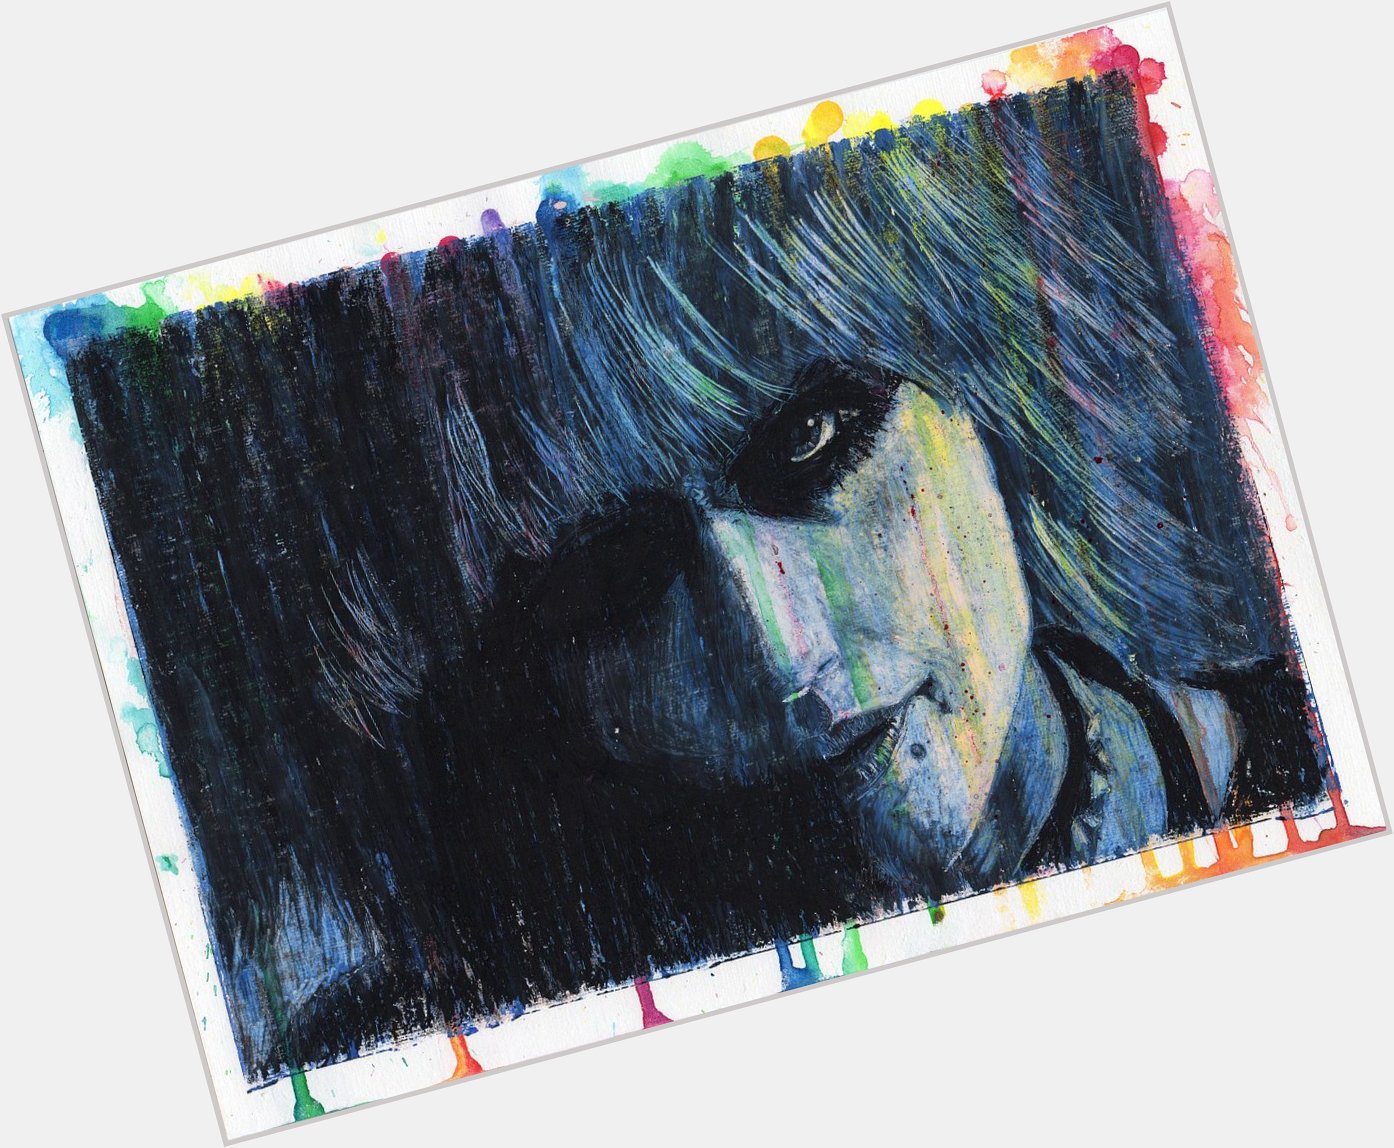 Happy birthday Daryl Hannah! ( This picture: oil and ink on acrylic paper, 30cm x 21cm. 